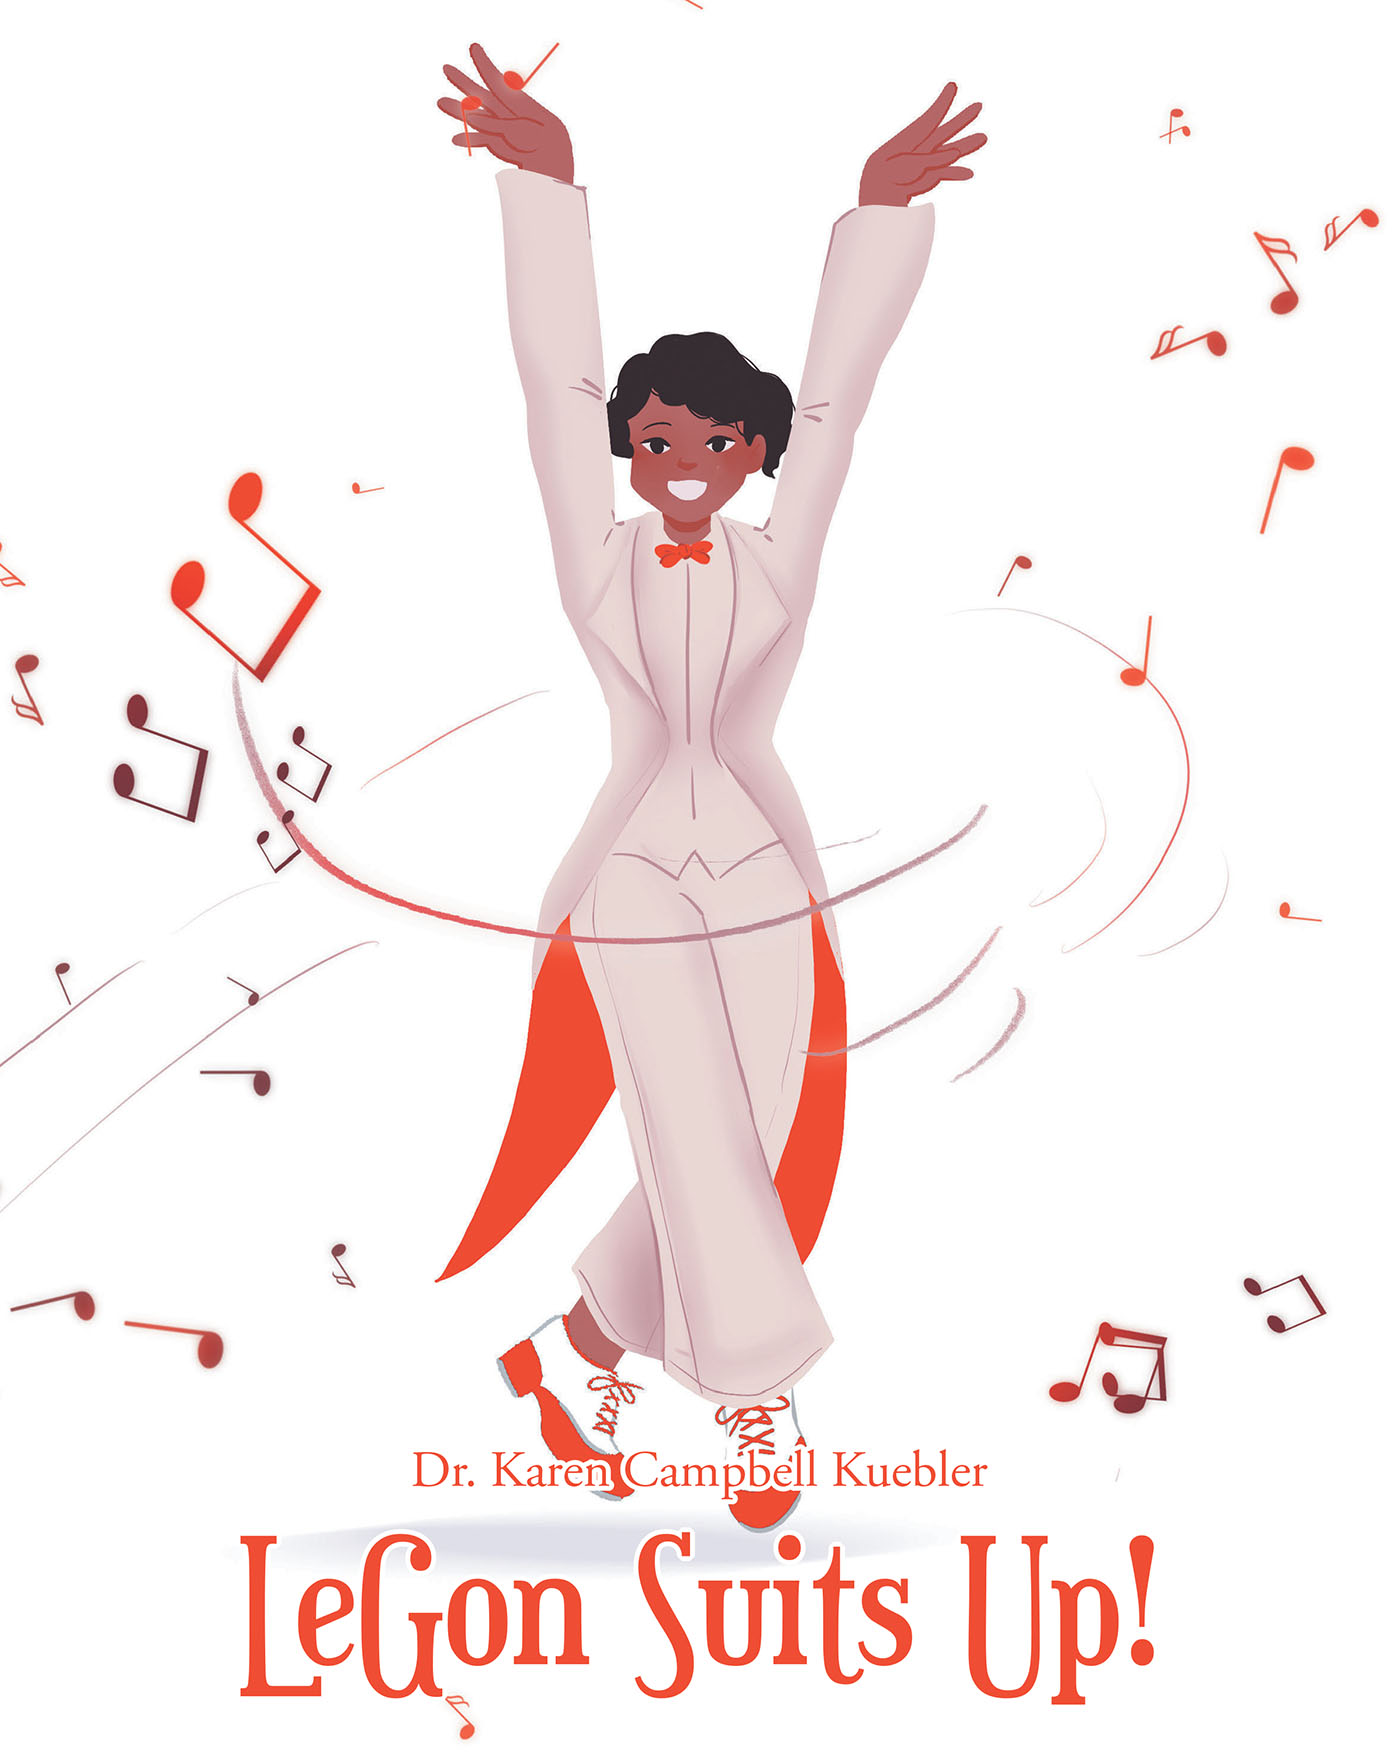 Dr. Karen Campbell Kuebler’s New Book, “LeGon Suits Up!” is a Delightful and True Story for Young Readers All About the Pioneering Life and Career of Dancer Jeni LeGon